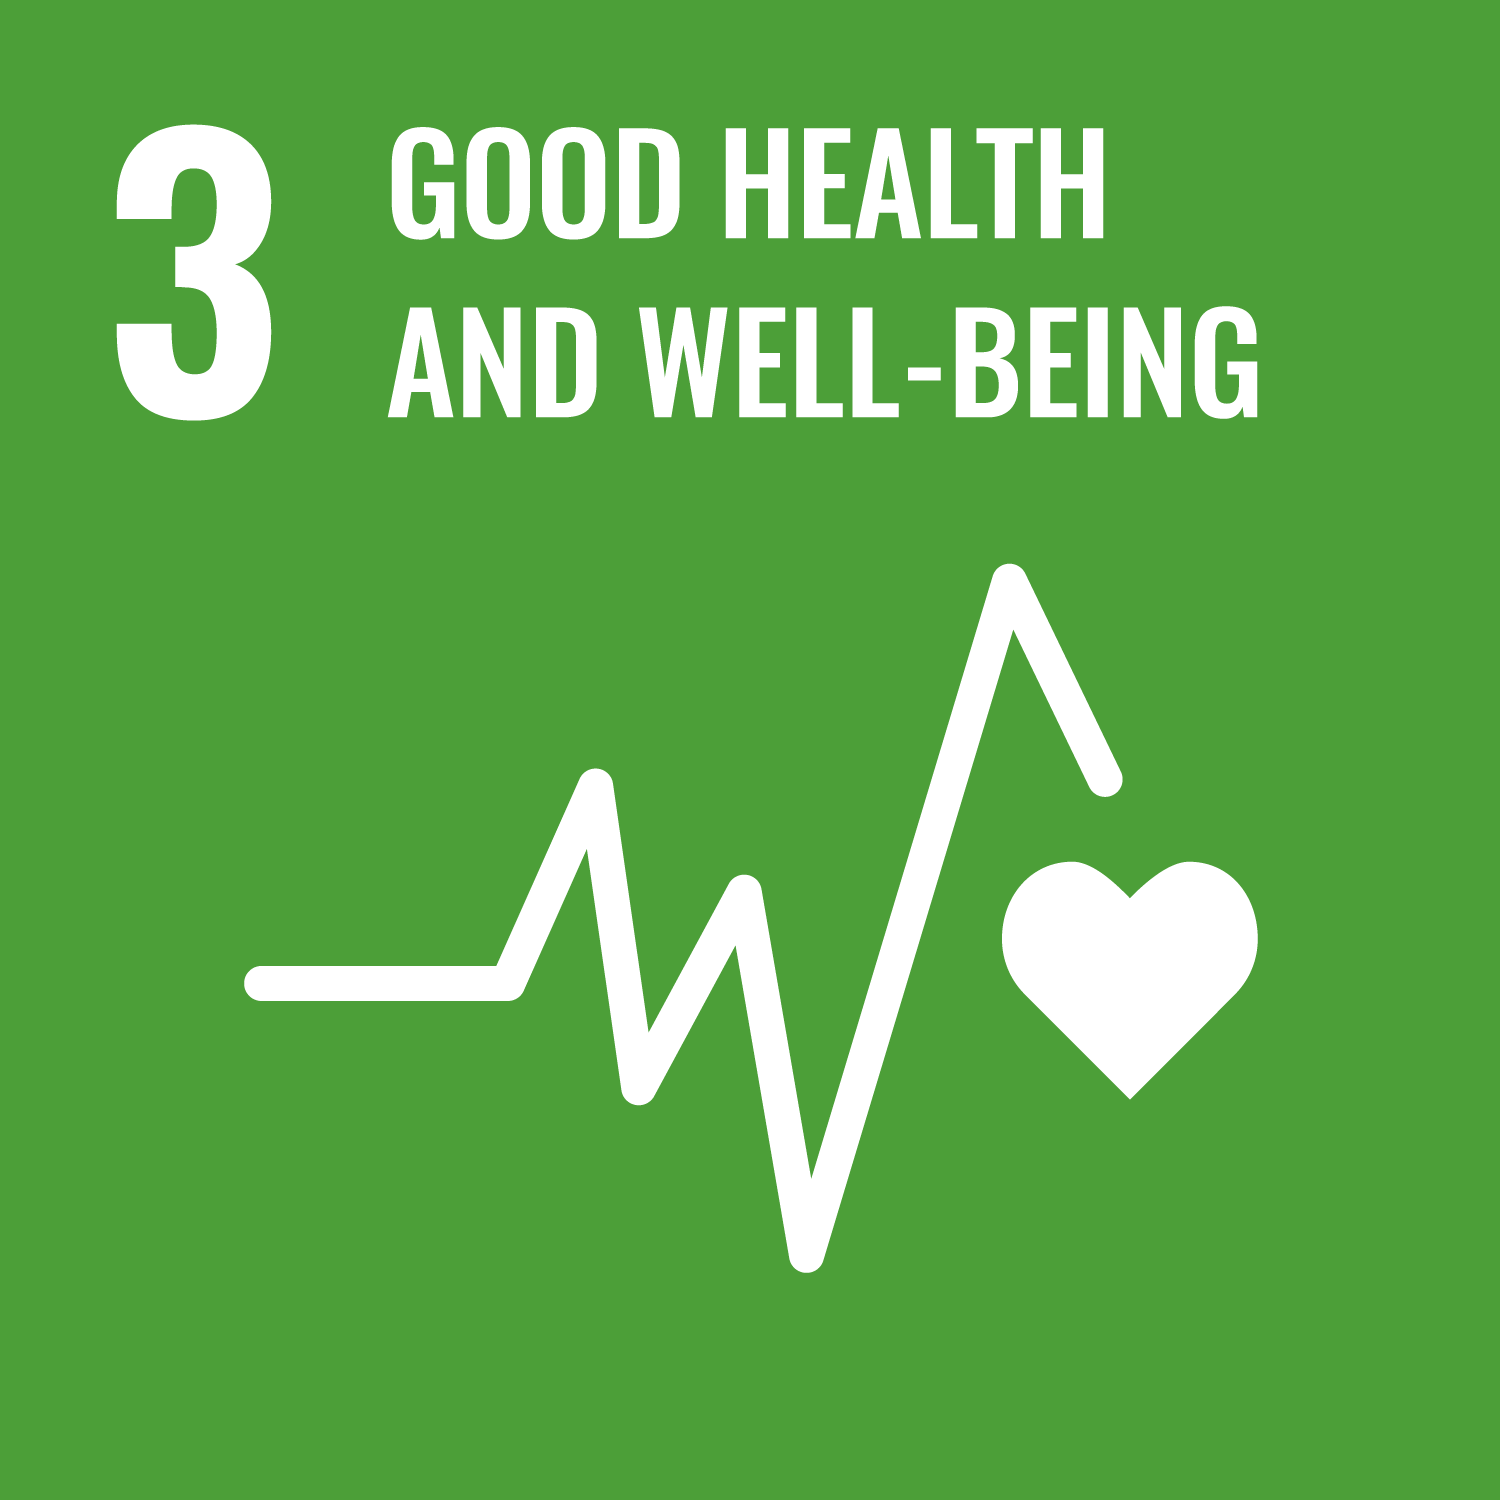 3：GOOD HEALTH AND WELL-BEING